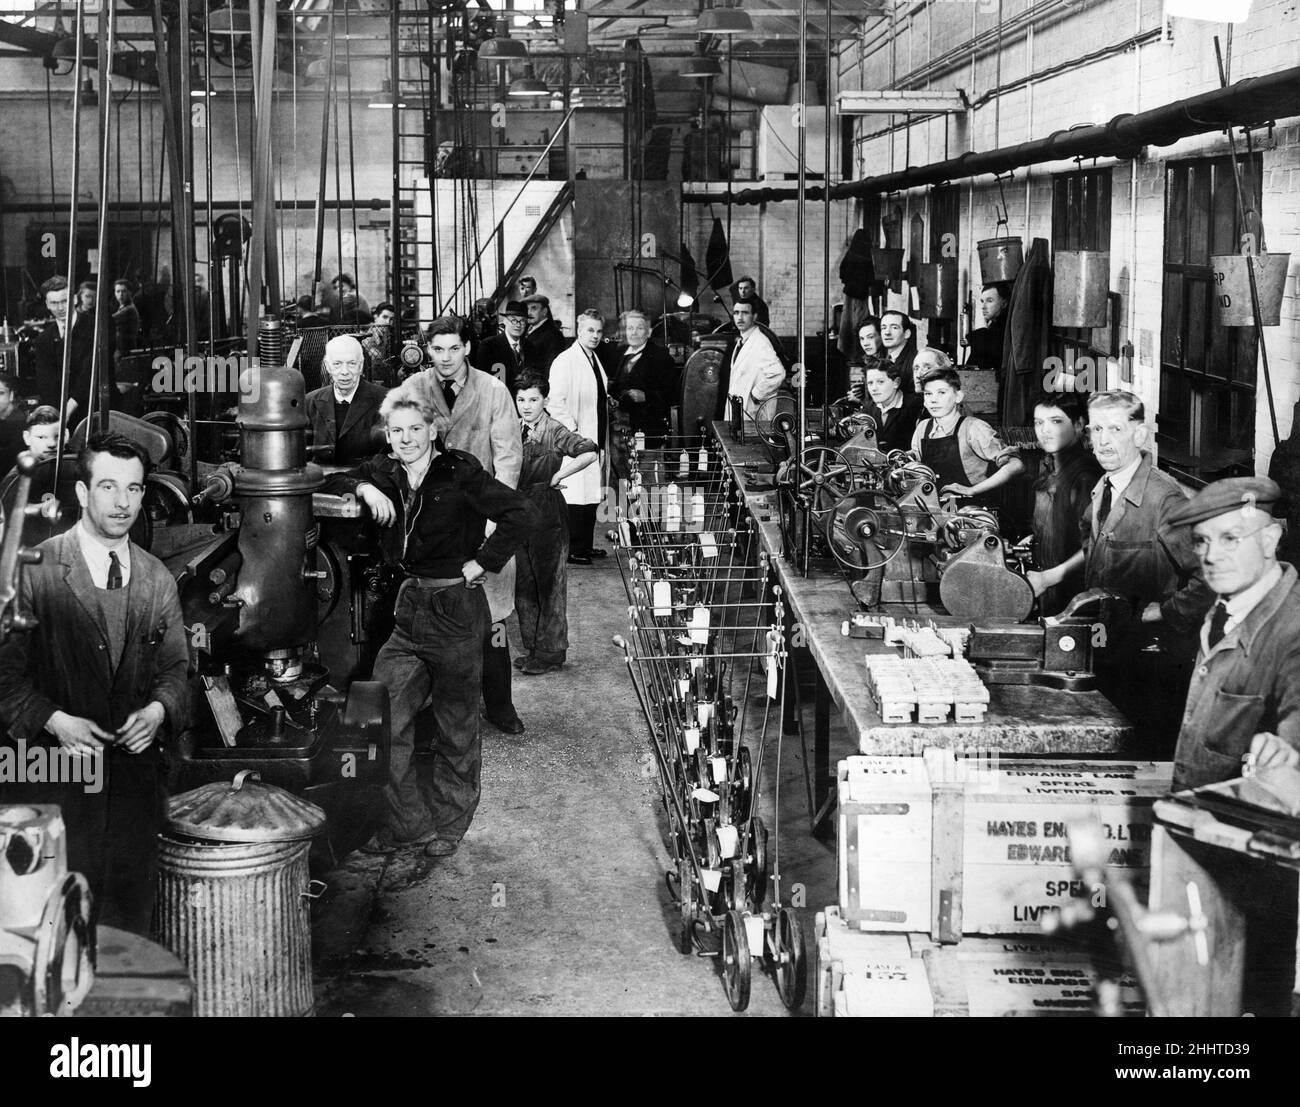 A section of the Hayes Engineering plant at Speke, south Liverpool, now working to capacity, turning out agricultural machinery. The company is eagerly waiting for the opportunity to extend its premises there. January 1940. Stock Photo